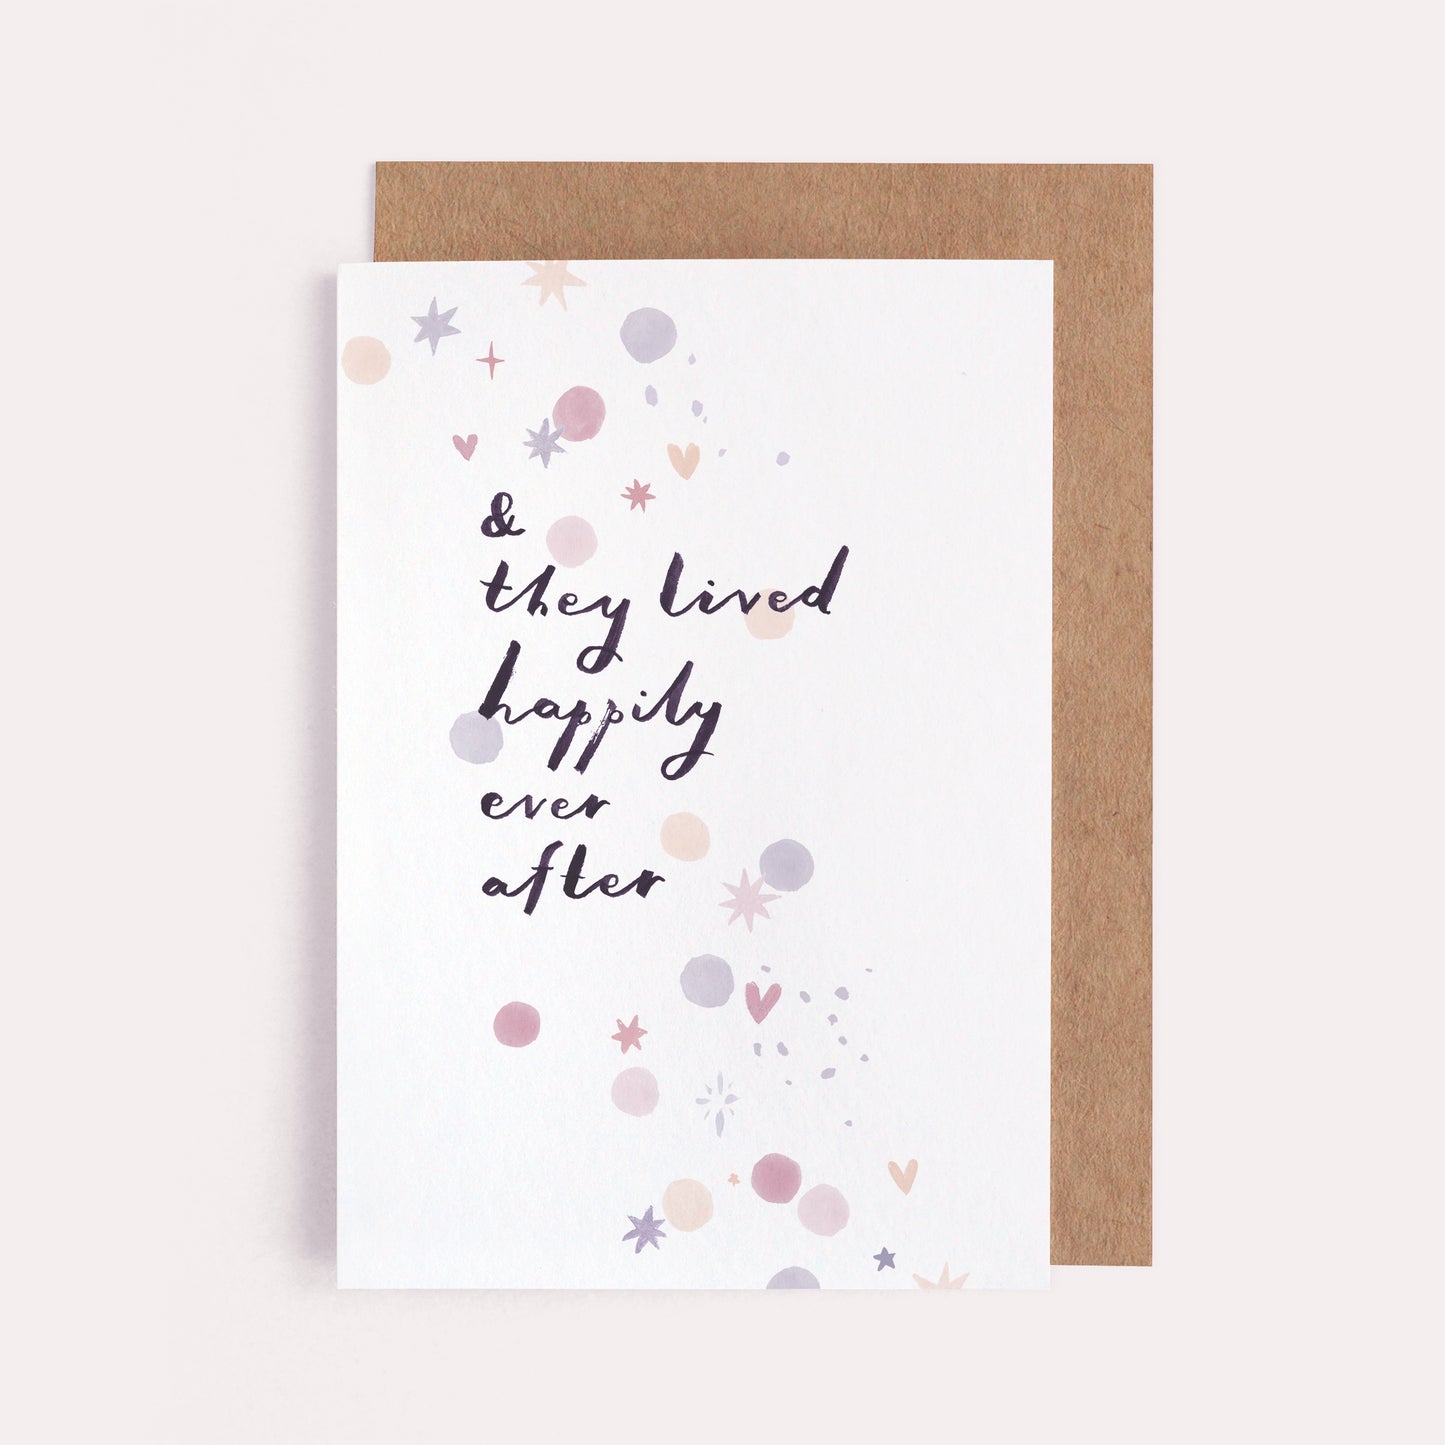 HAPPILY EVER AFTER CARD